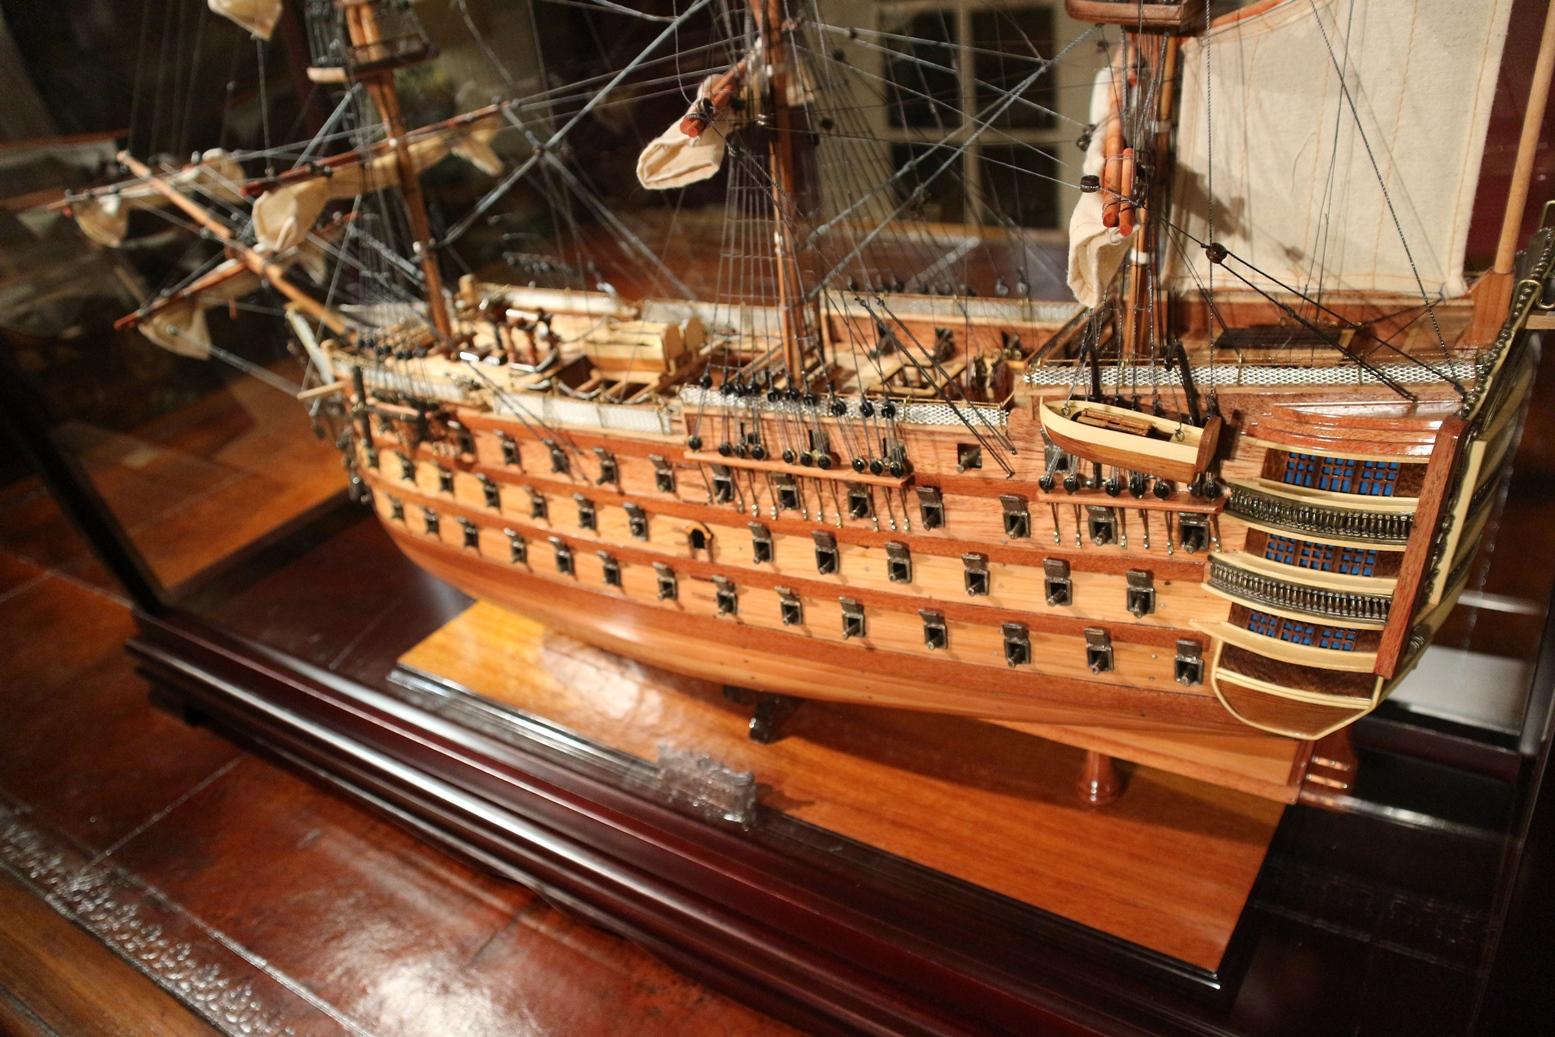 Dimensions: H 83 x D 29 x W 97 cm
Display cabinet 102 x 37 x H 99

H.M.S. Victory, Adm. Horatio Nelson’s flagship at the Battle of Trafalgar in 1805, is now available as a museum-quality, FULLY ASSEMBLED model. This is an “Exclusive Edition”